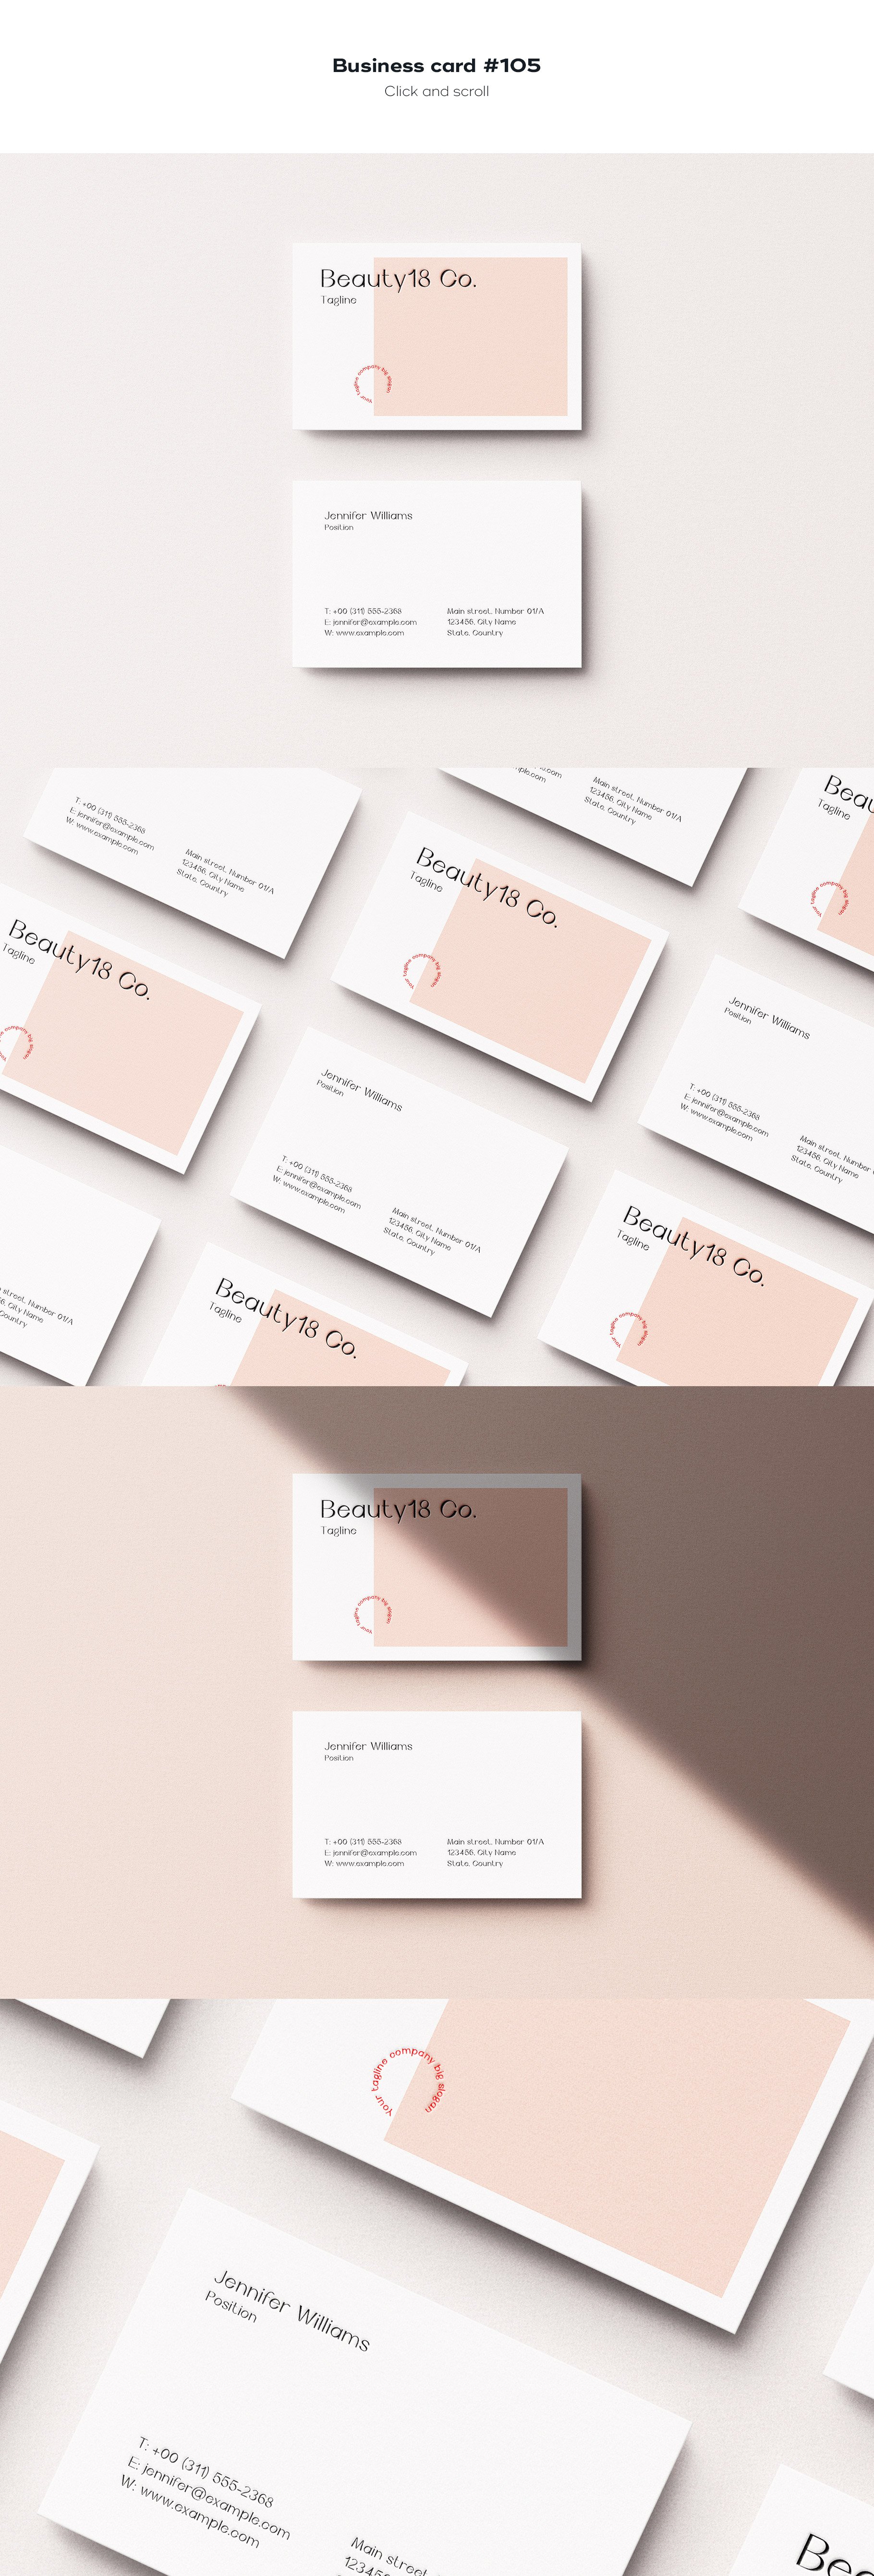 business card 105 754